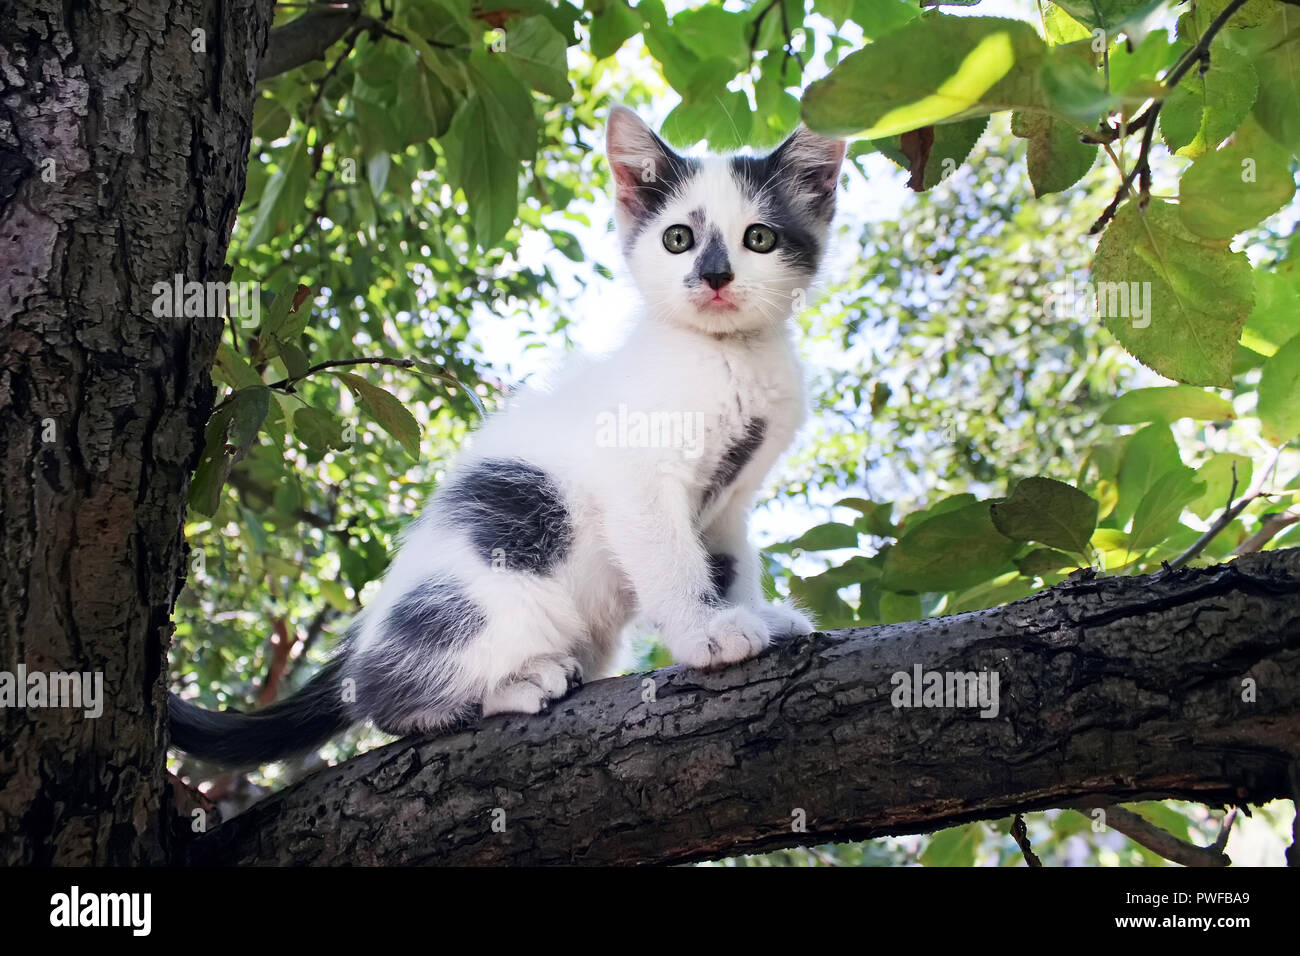 Small white kitten with gray spots climbed up on a tree in the garden. Stock Photo